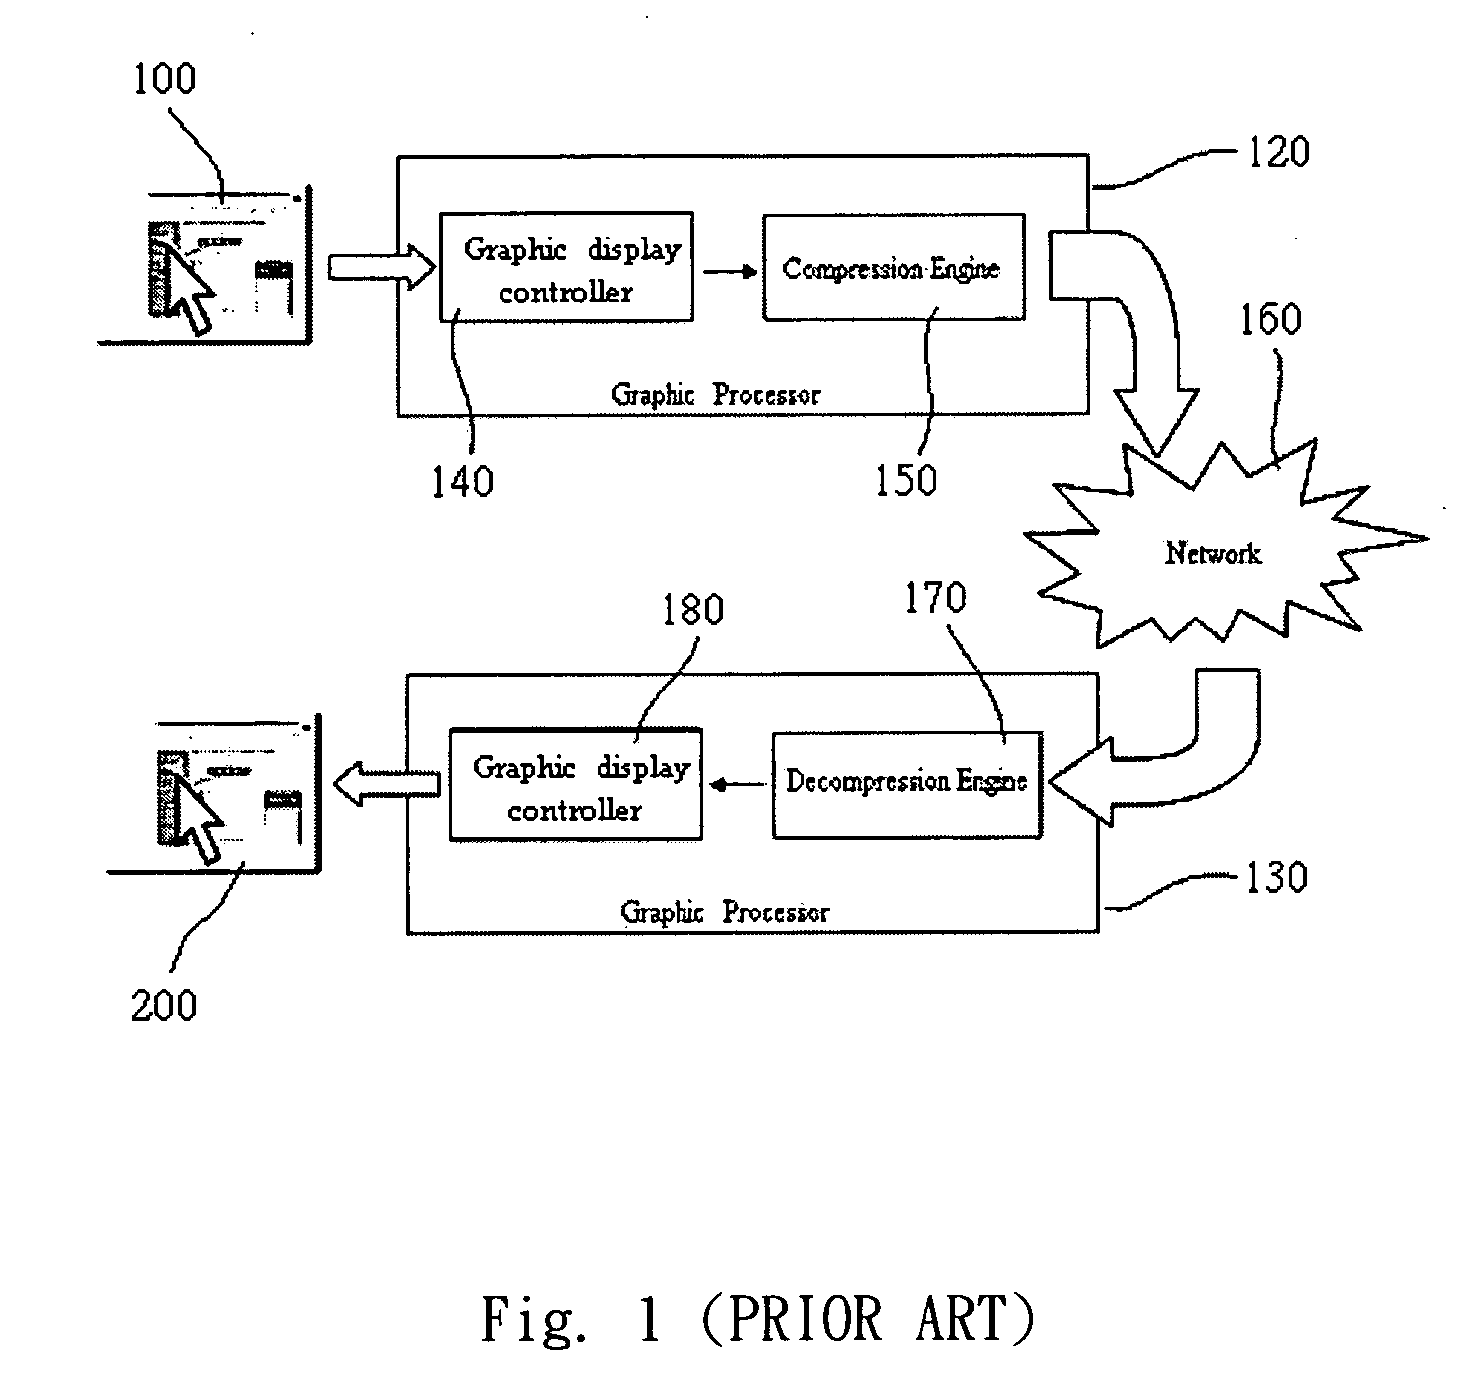 Method and system for implementing a remote overlay cursor